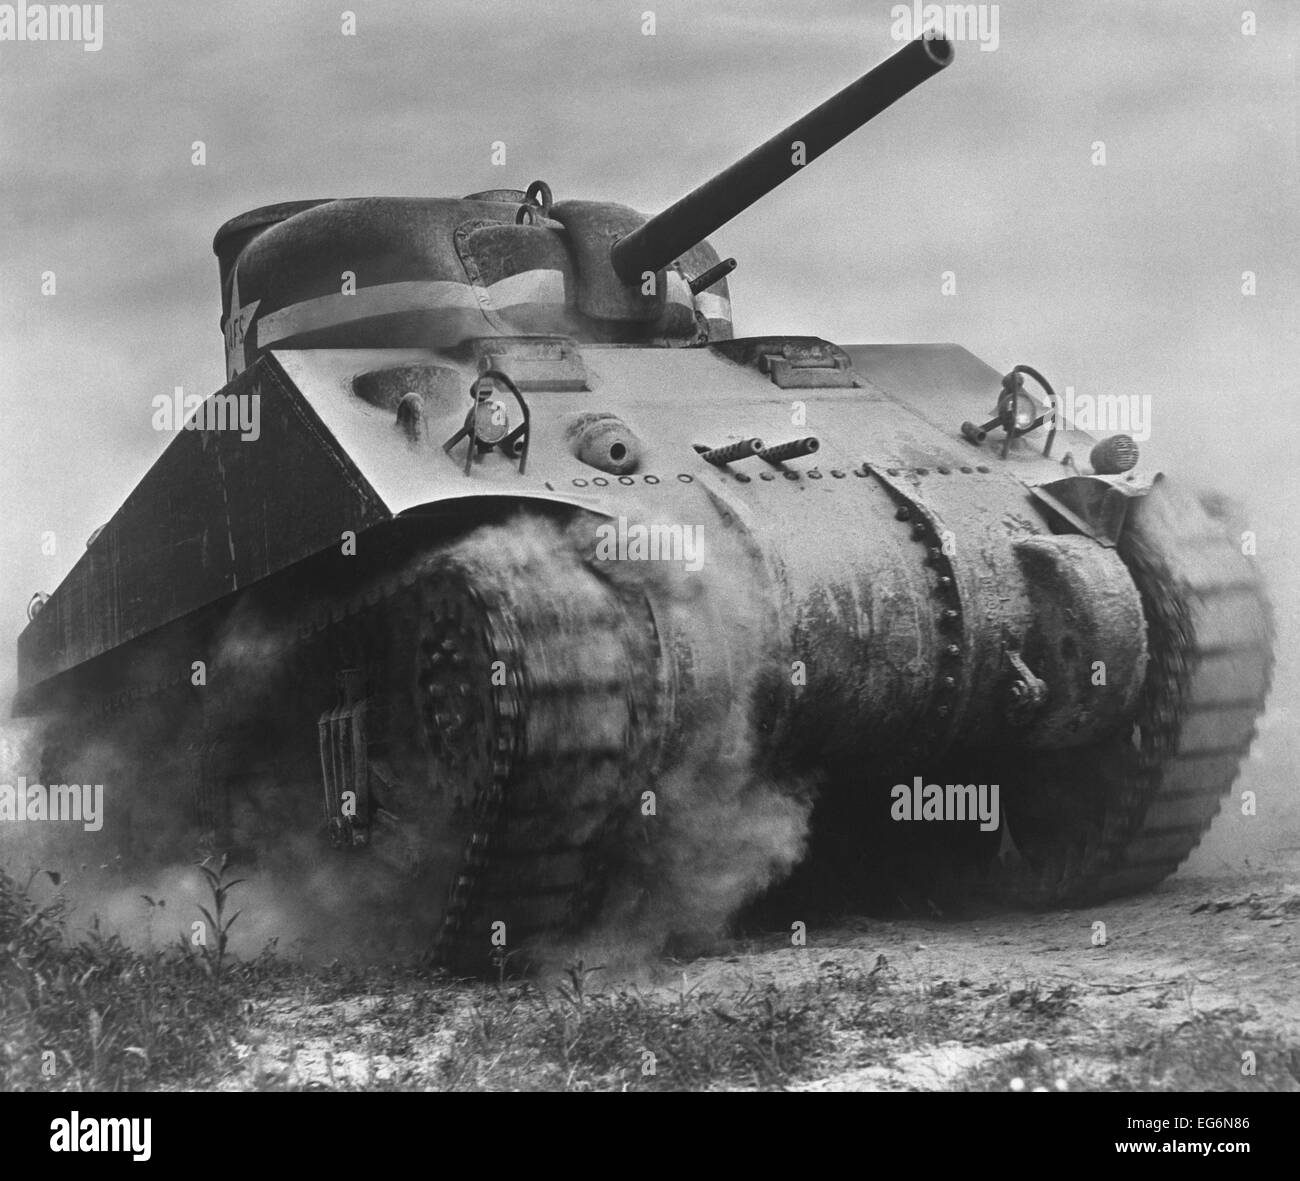 The Sherman tank was the primary battle tank of the U. S. and Western Allies from 1942-45. Nearly 50,000 were produced during Stock Photo